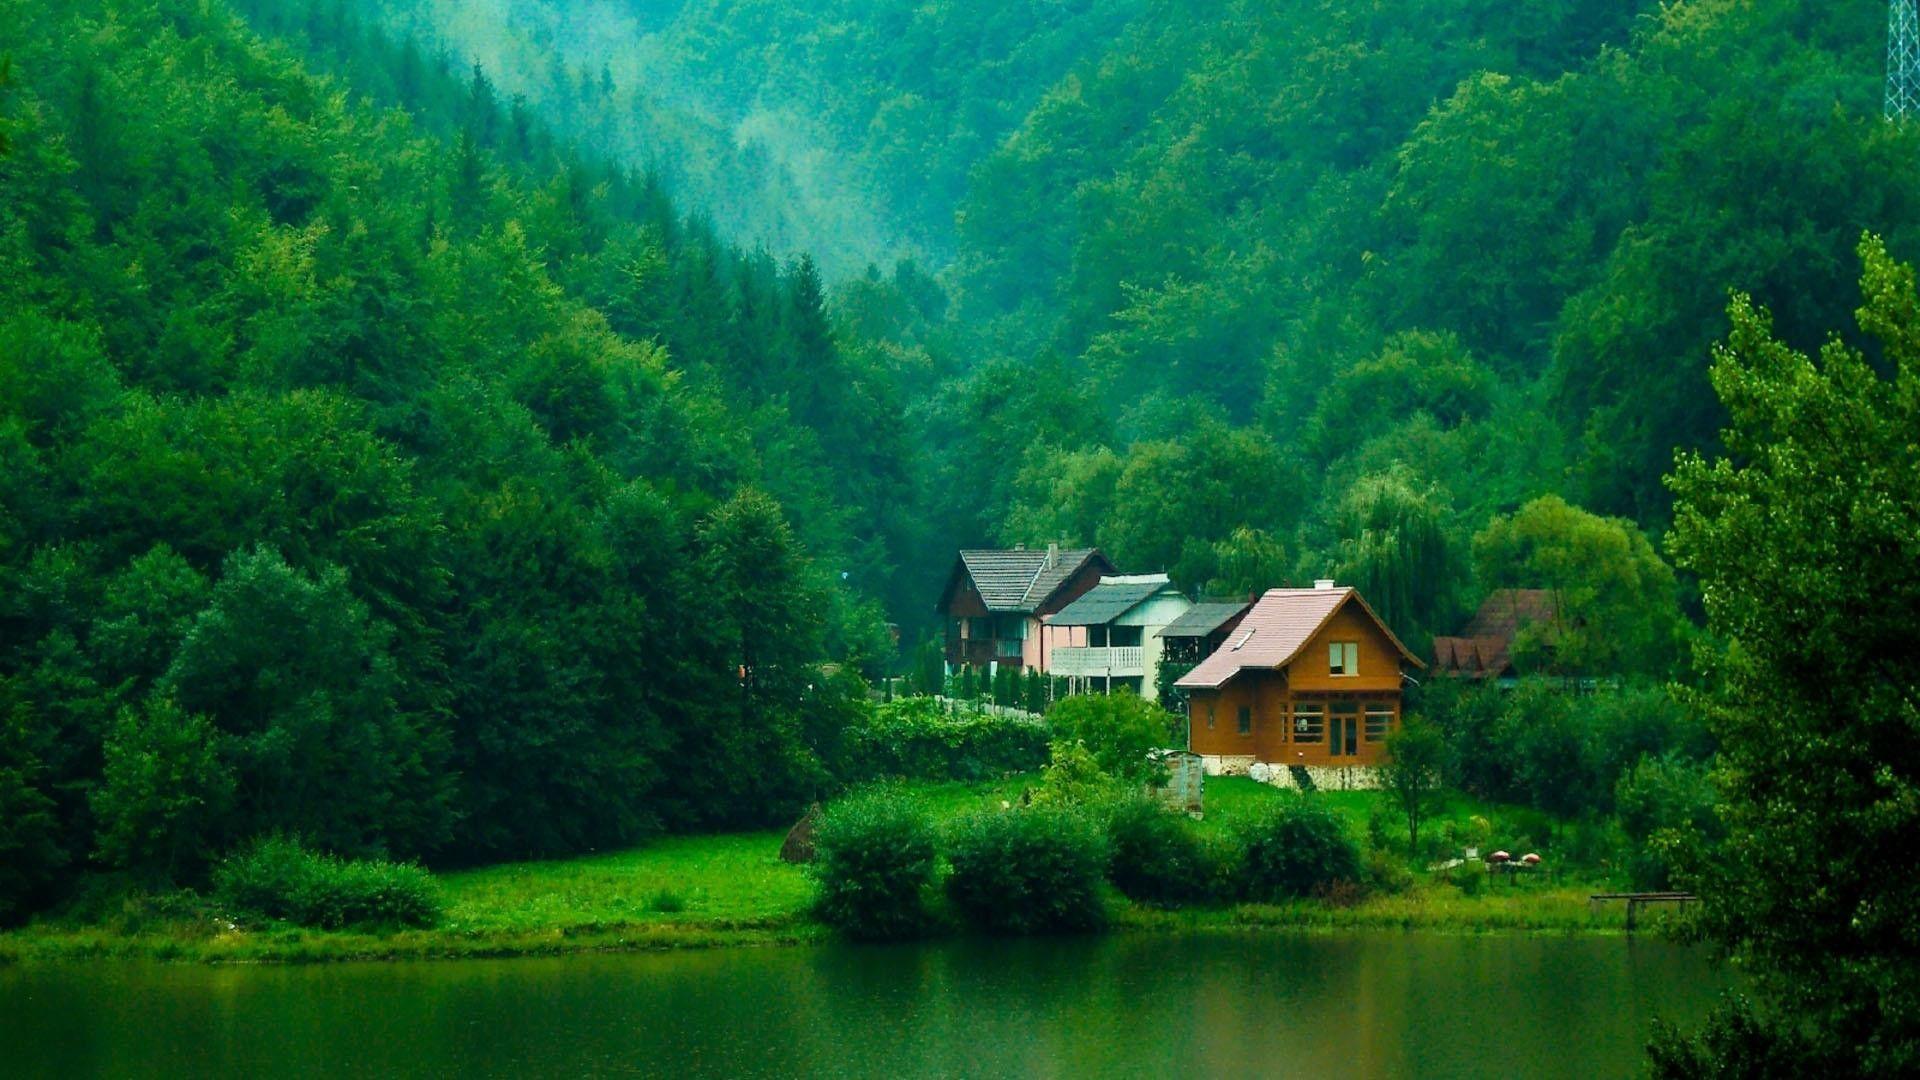 Forests: Rain Forest Lake Houses Mountain HD Wallpaper Widescreen